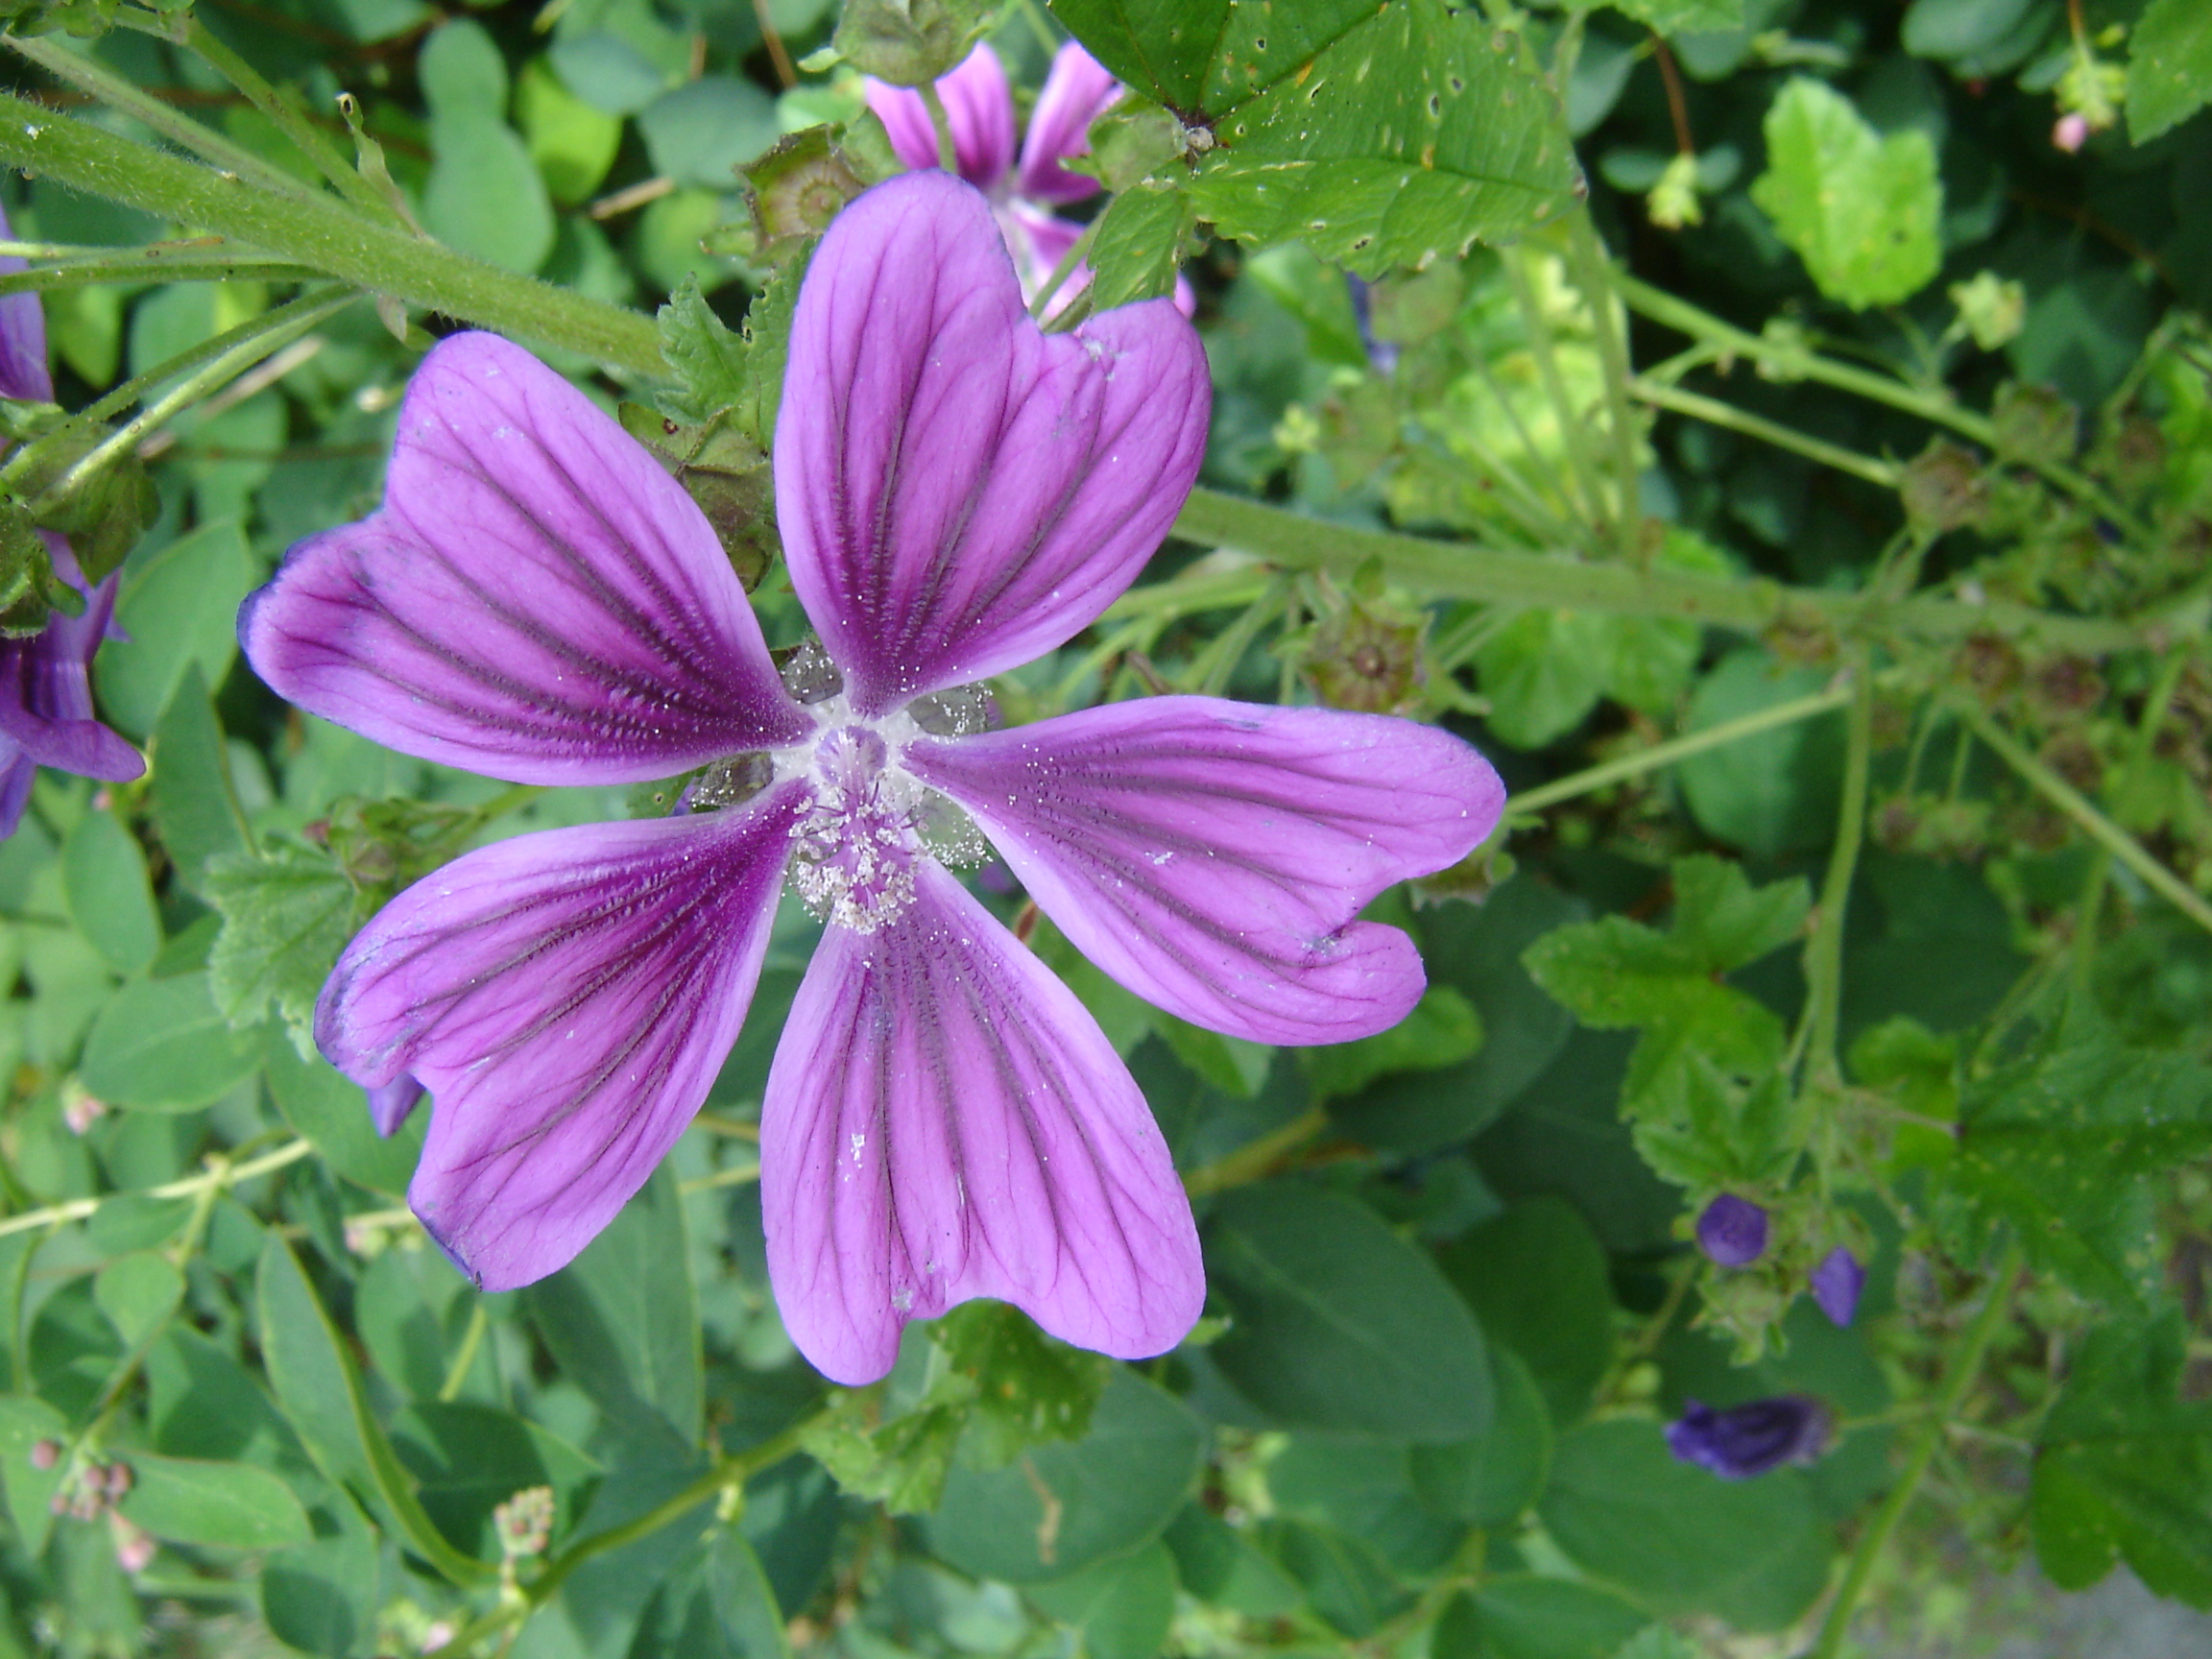 Mallow flower on towpath of Oxford canal.